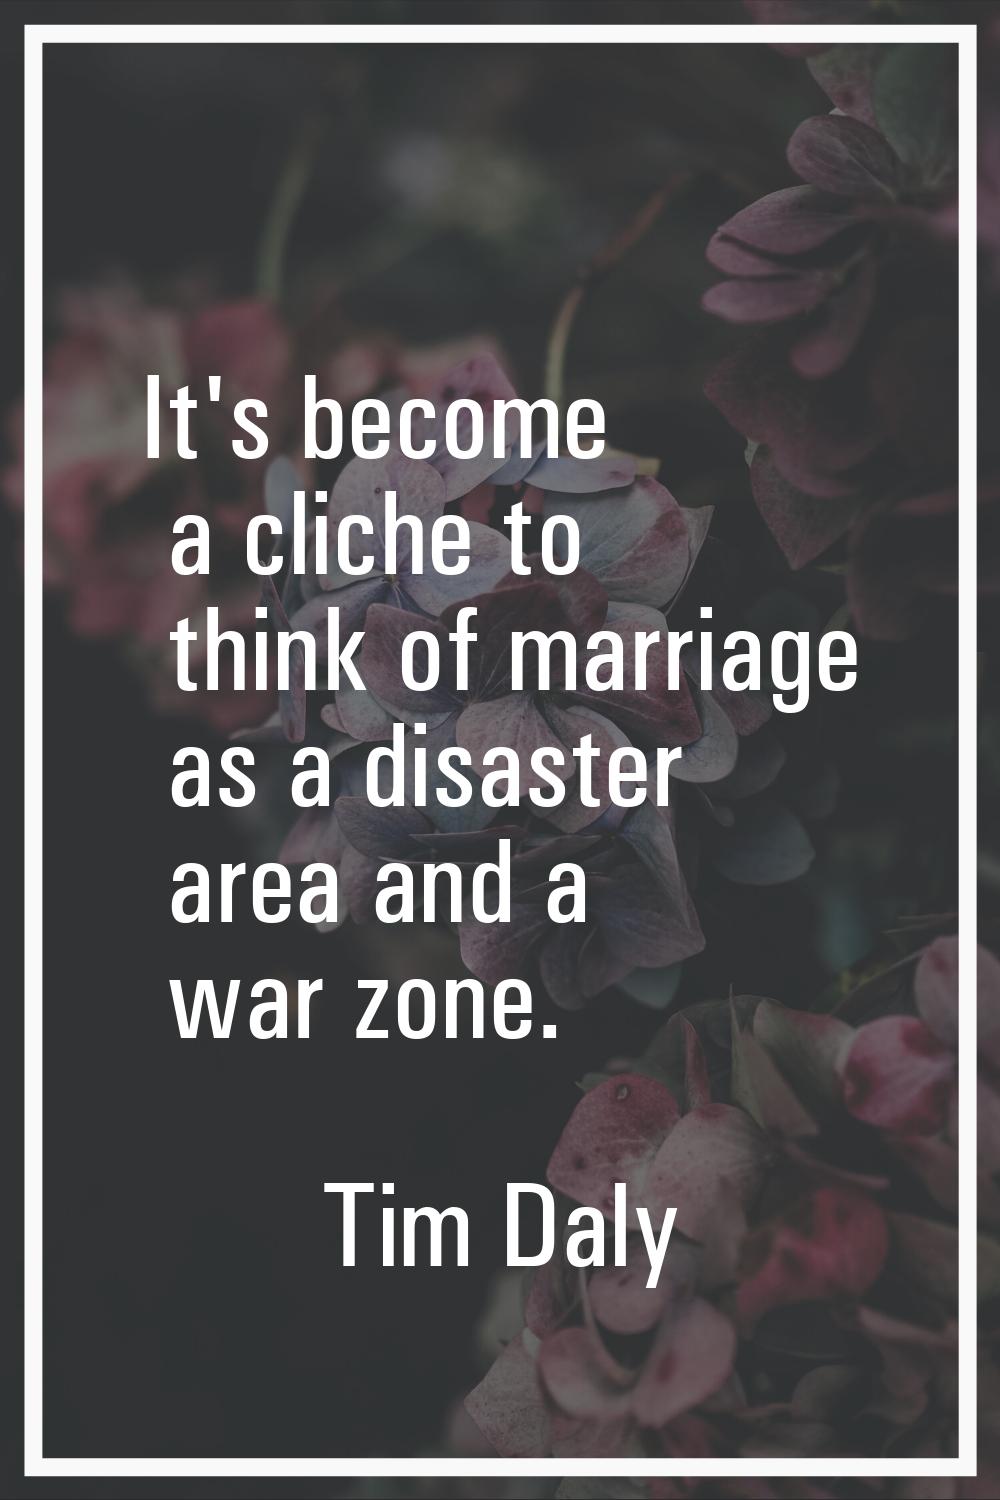 It's become a cliche to think of marriage as a disaster area and a war zone.